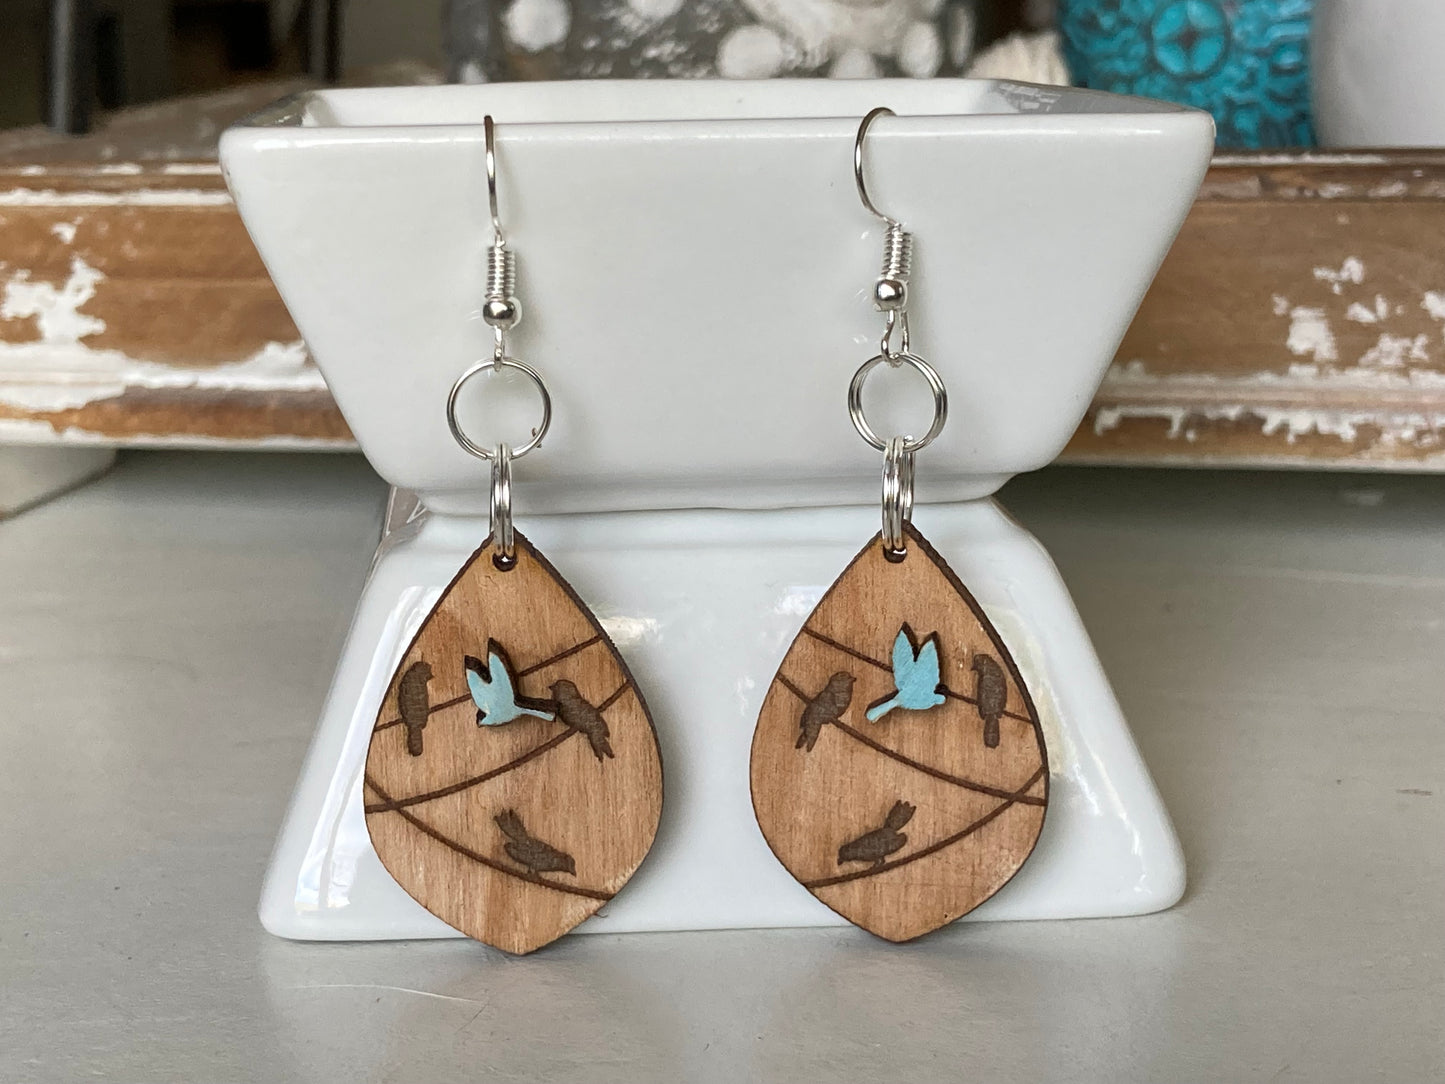 Hand painted blue bird on wire earrings